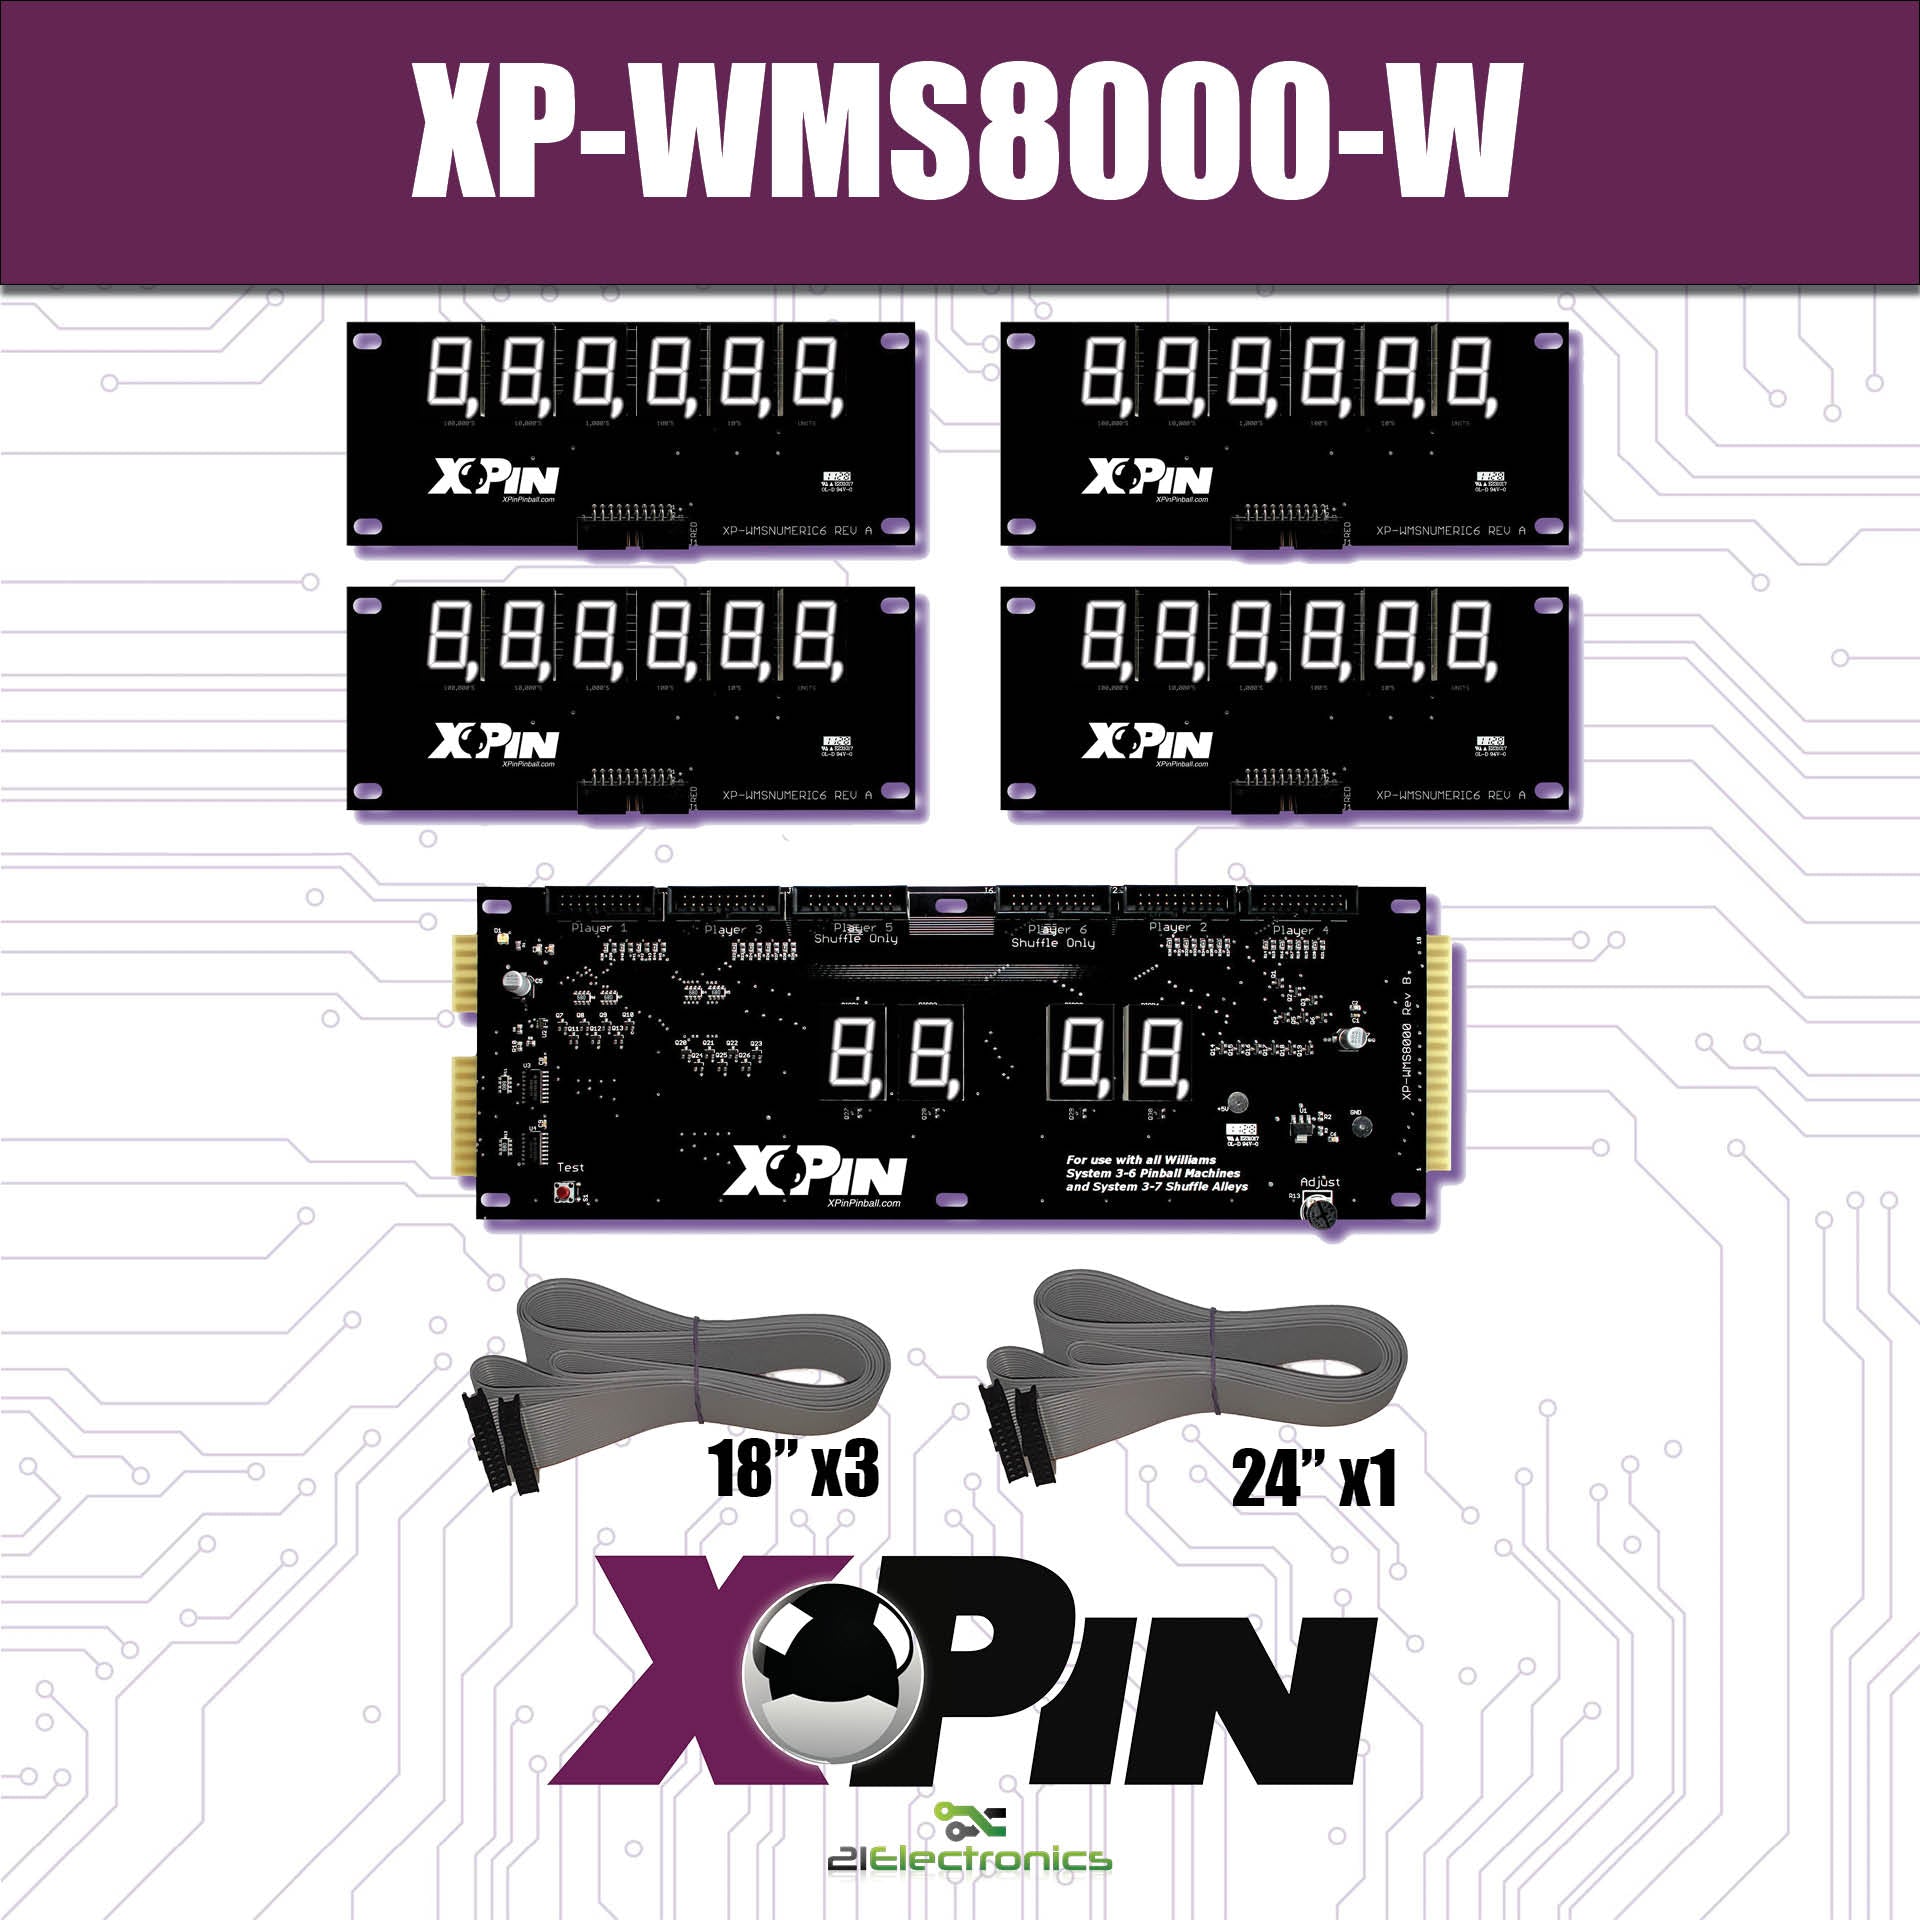 XP-WMS8000-W /  WILLIAMS SYSTEM 3-6 / 6 DIGIT DISPLAY: WHITE (Includes Red, Green & Blue Vinyl Gel)